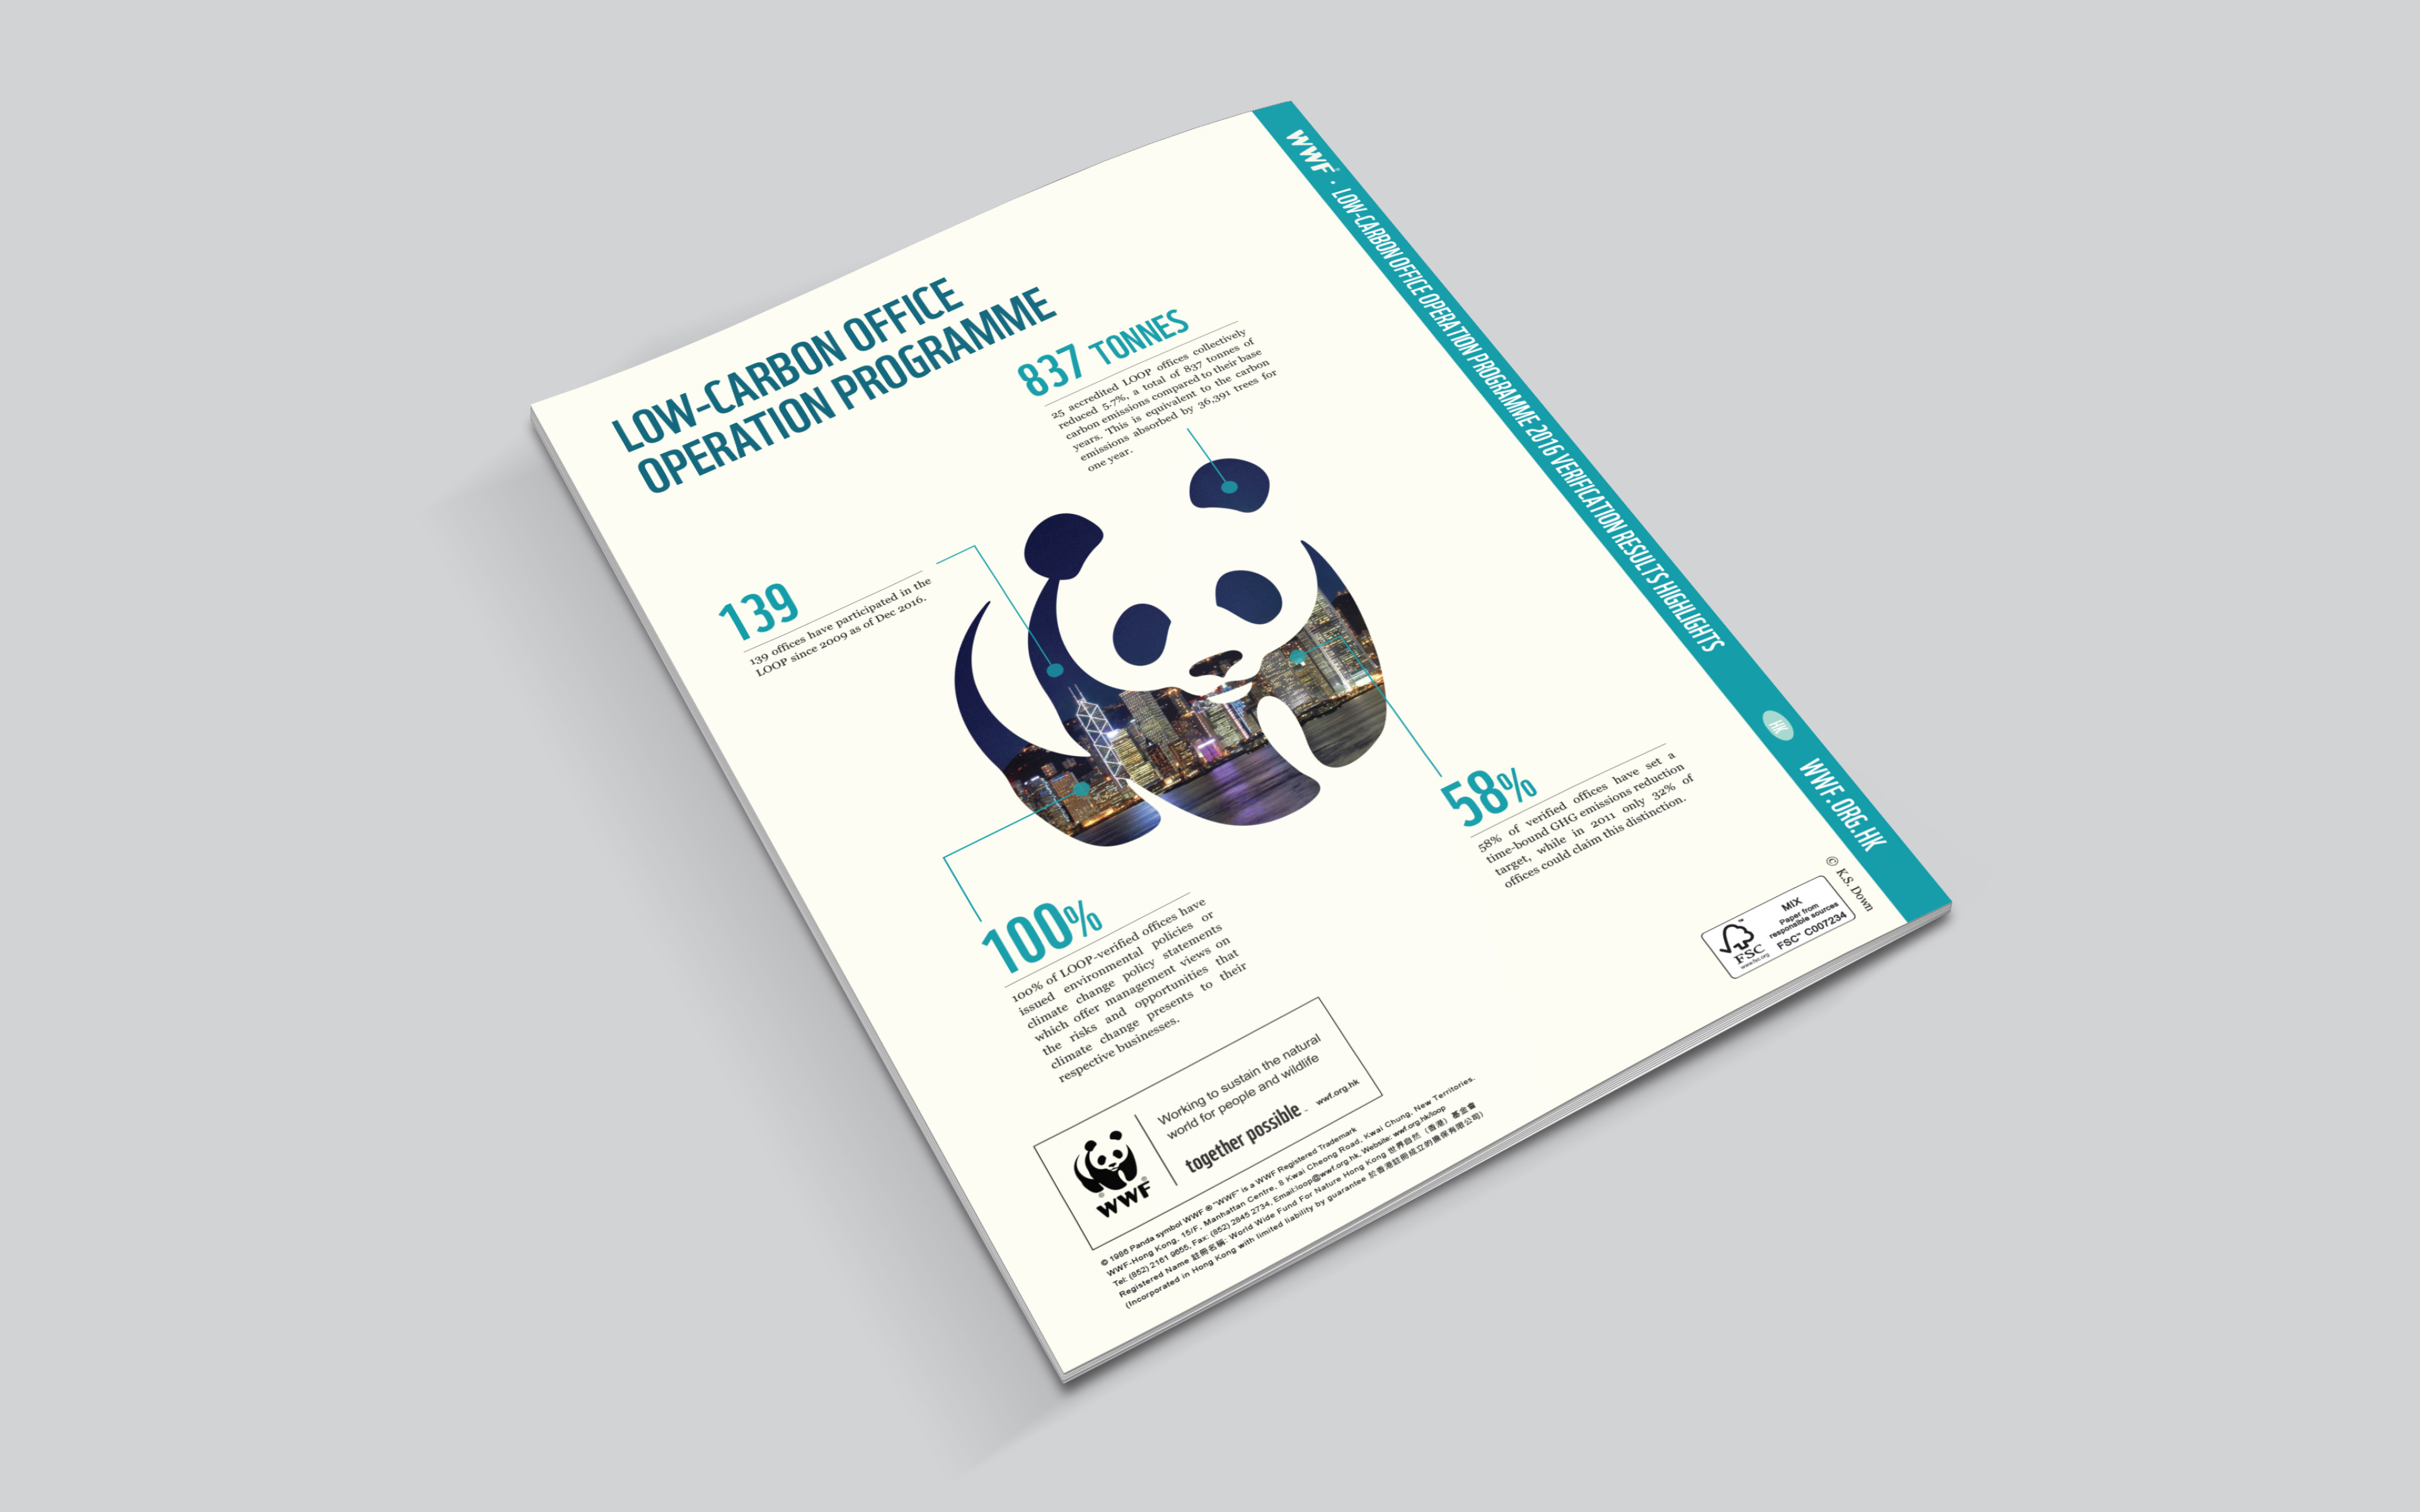 WWF Hong Kong infographic, and report design